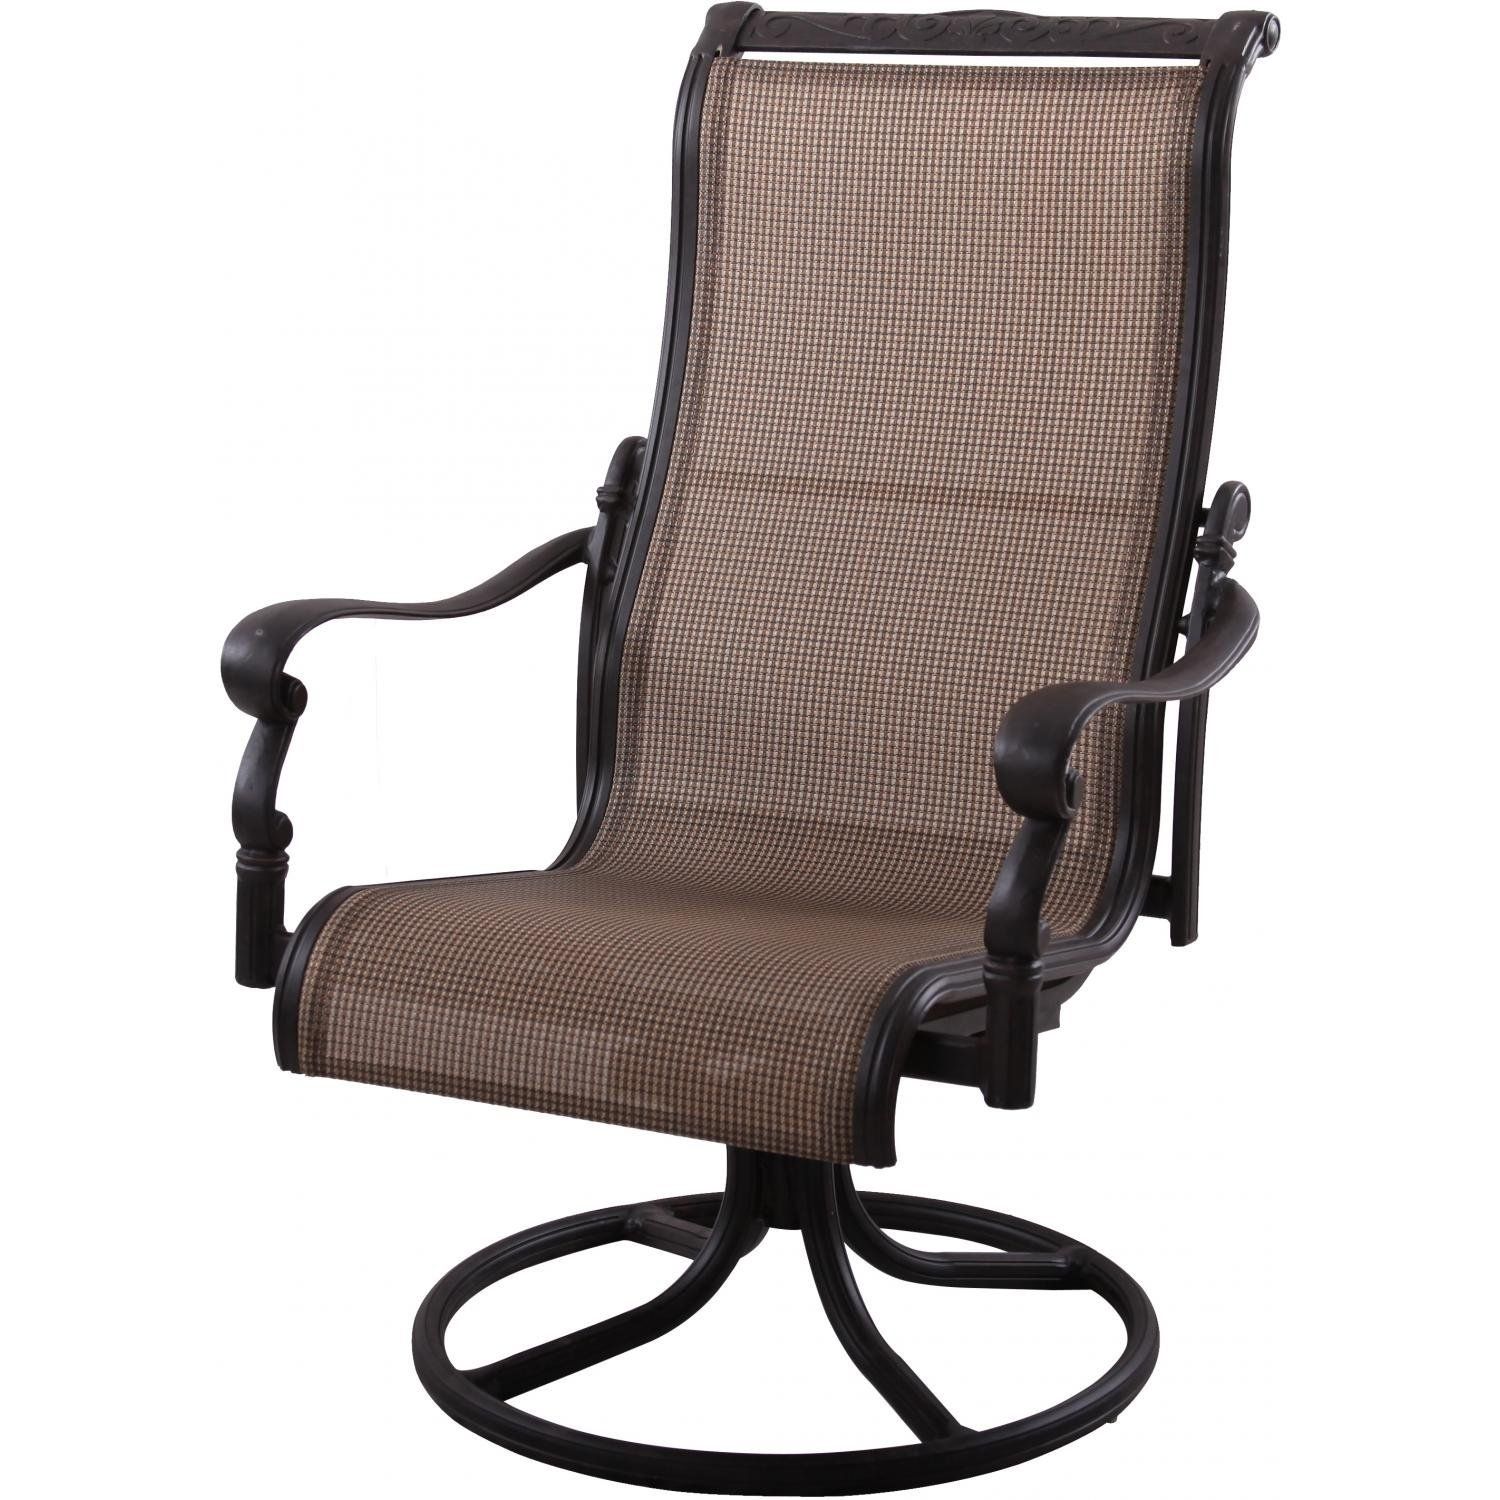 Chair | 2 Patio Chairs Rocking Patio Furniture Set Patio Chairs With For Patio Sling Rocking Chairs (View 4 of 15)